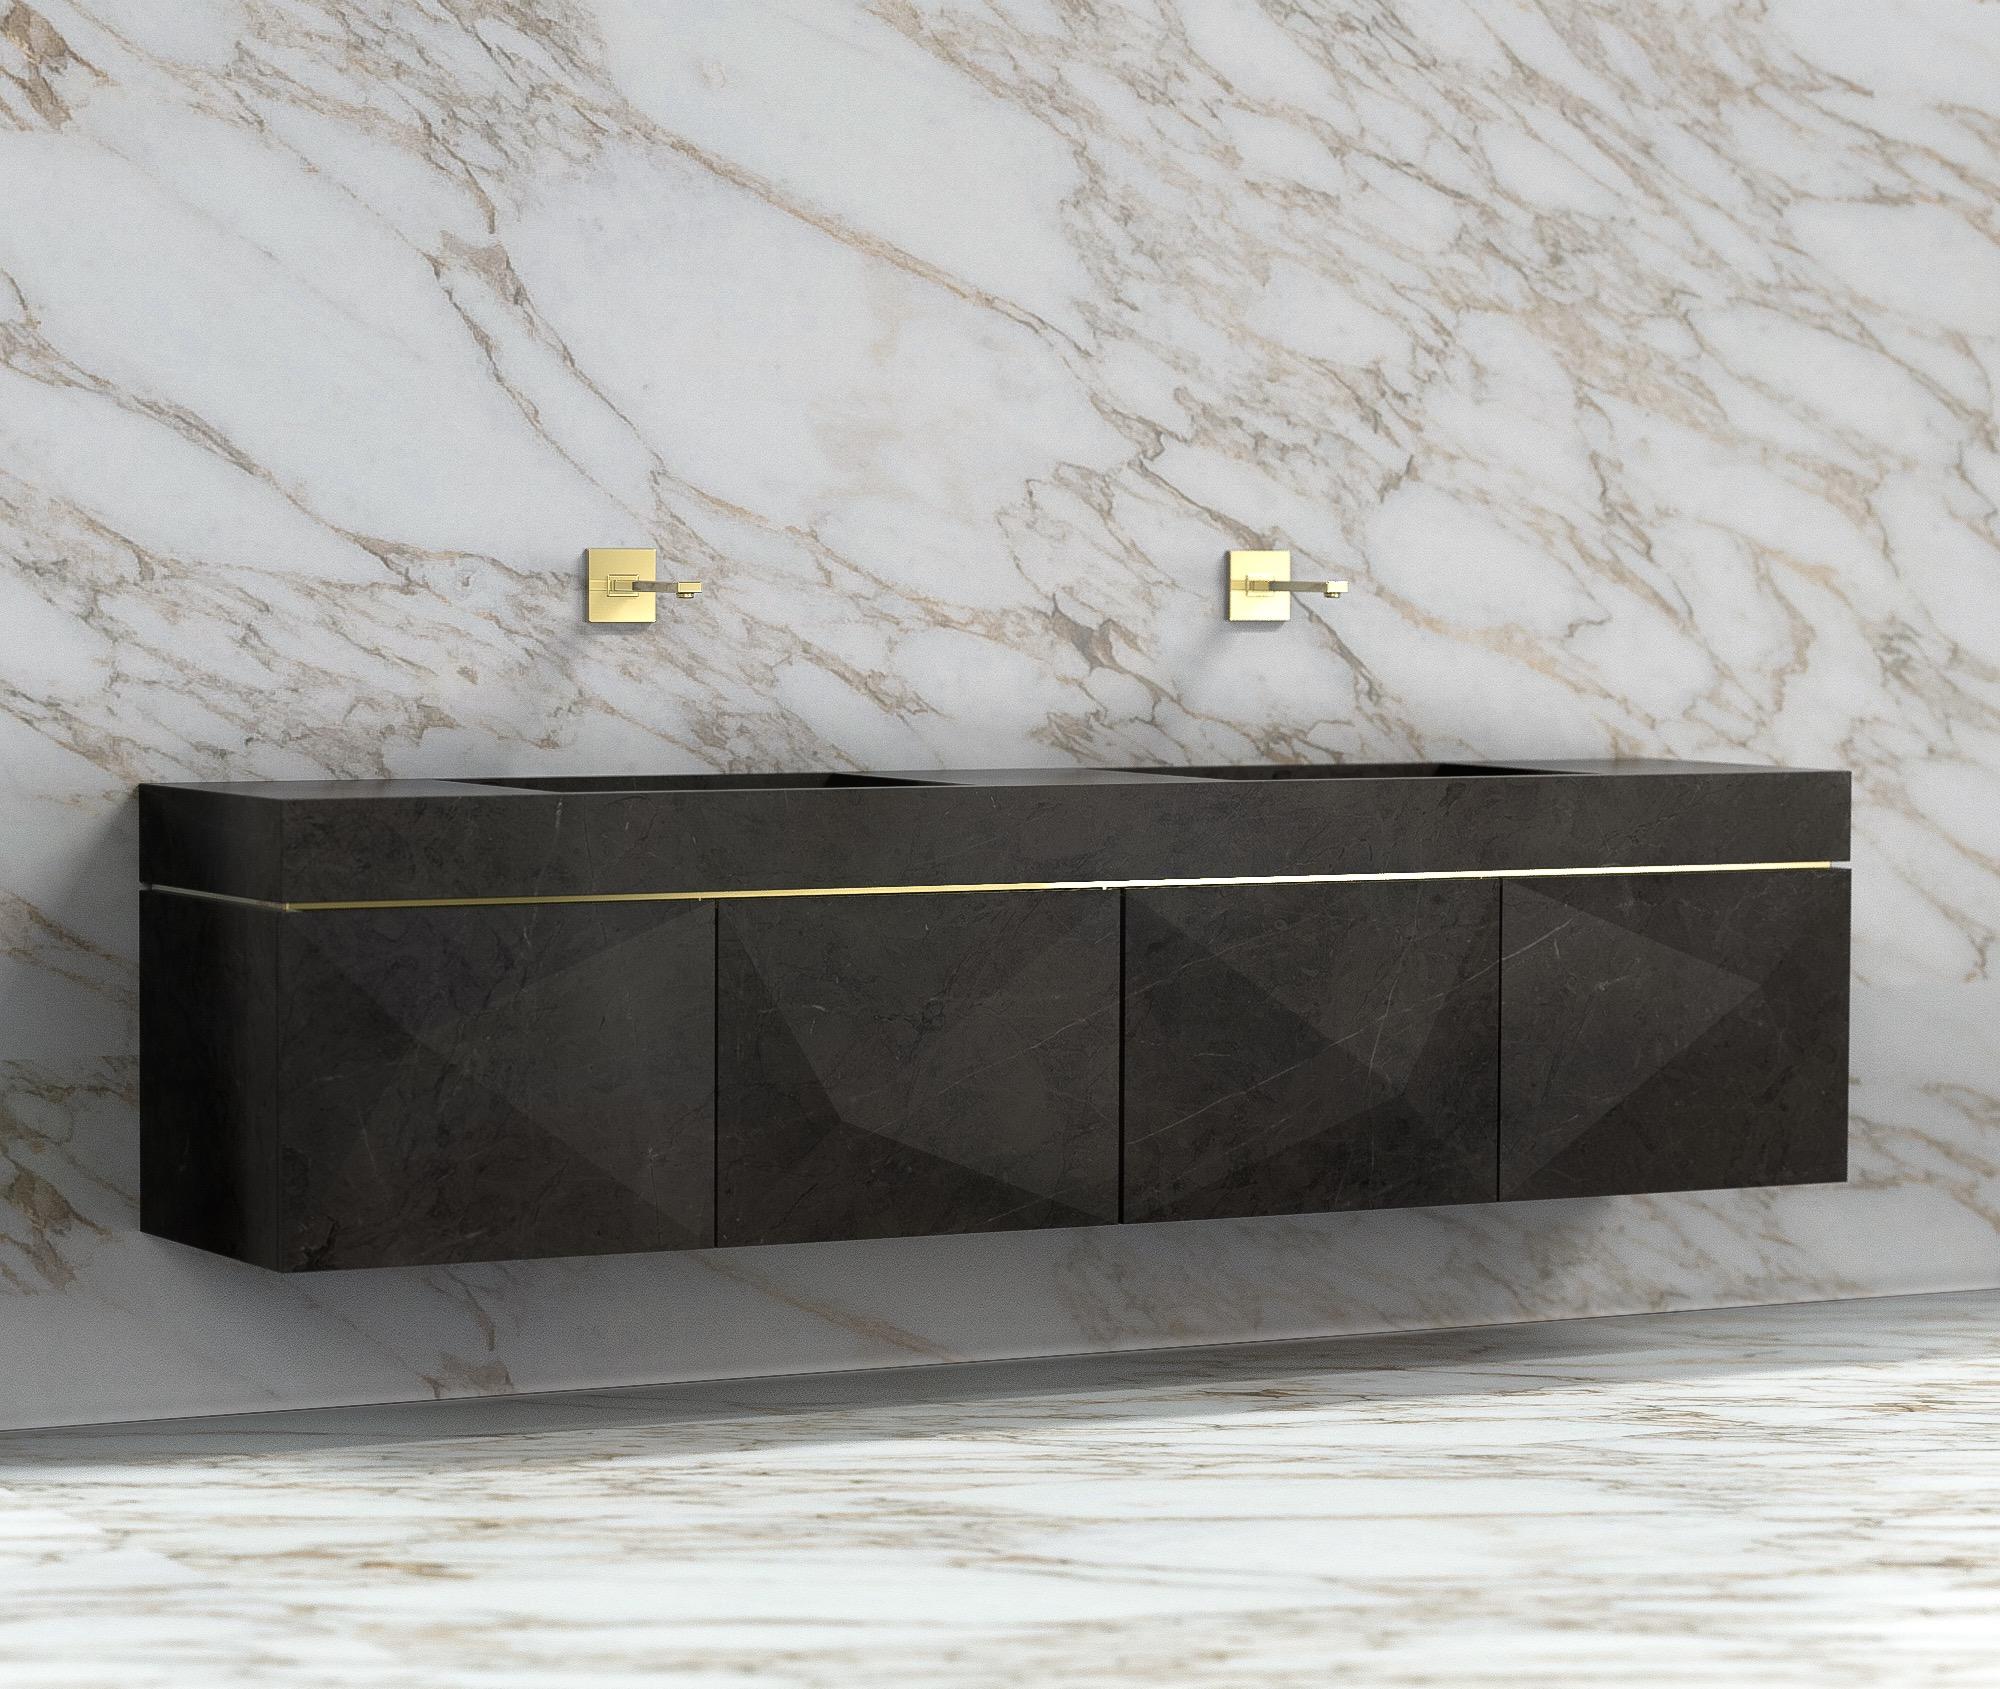 PuntaDue cabinet by Marmi Serafini
Materials: Nero Marquinia marble, brass.
Dimensions: D 50 x W 240 x H 60 cm (wall version)
Available in other marbles and in freestanding or wall versions.

Sharp but at the same time delicate marble cuts make the